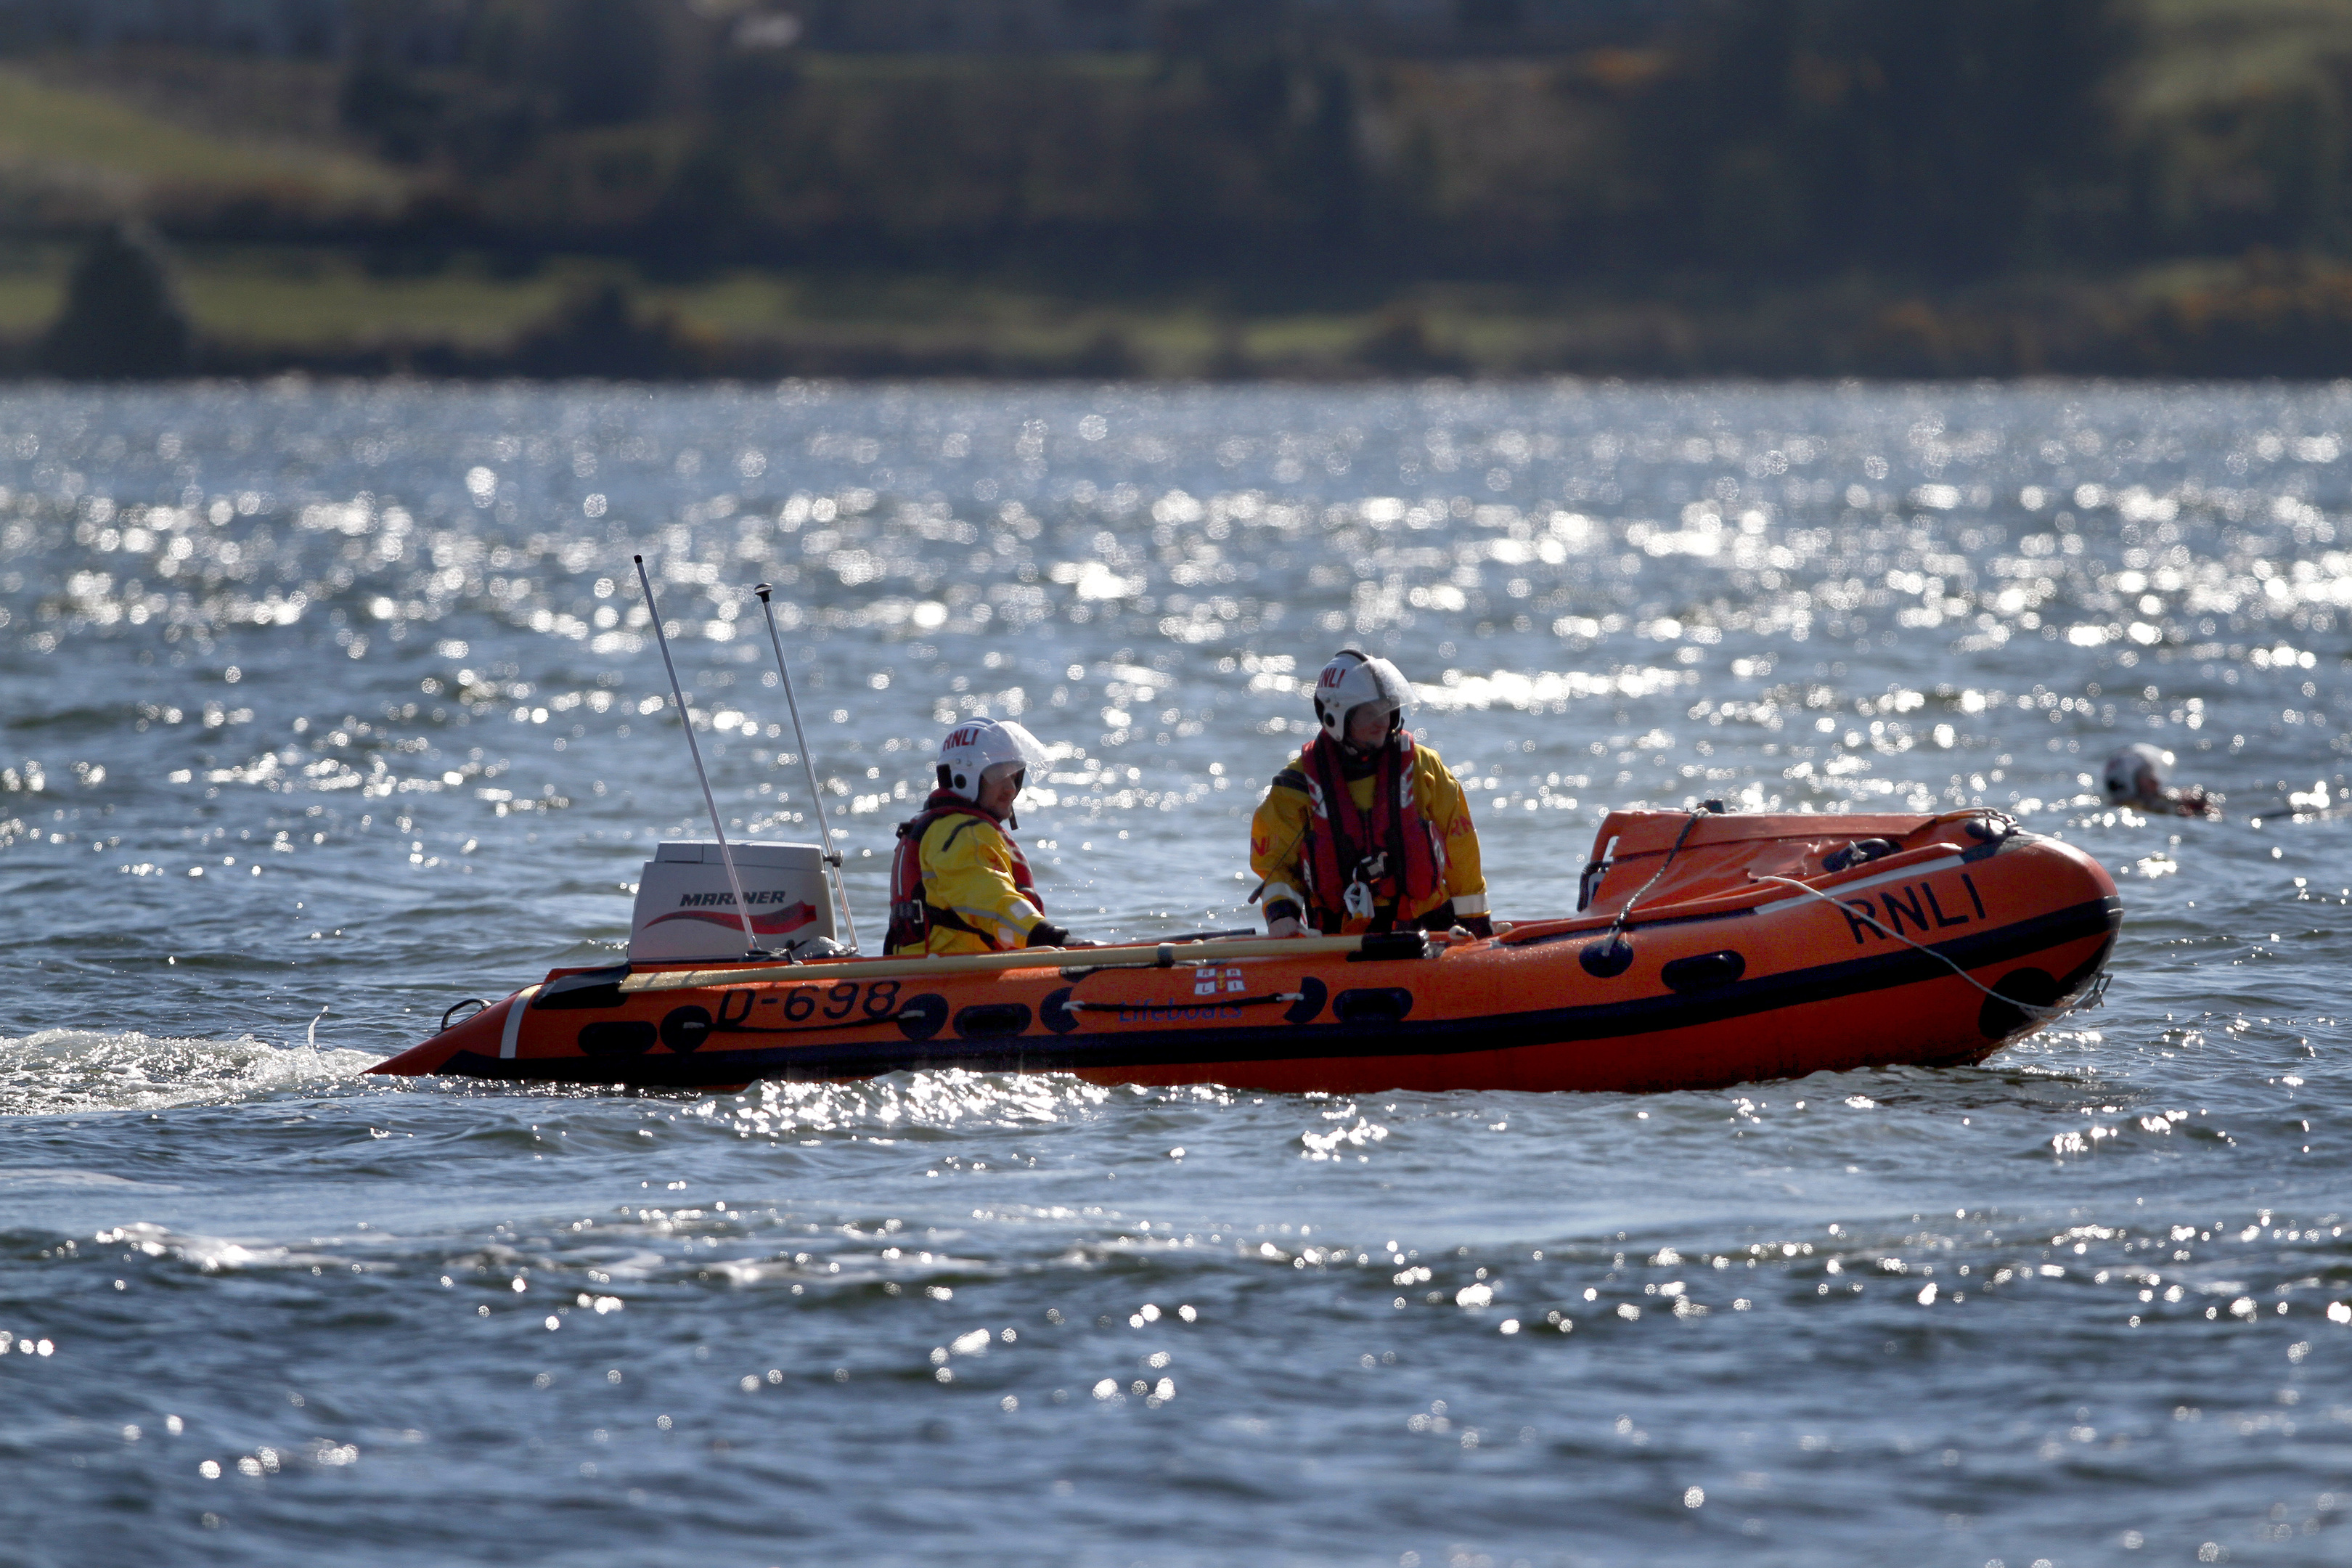 The inshore lifeboat.